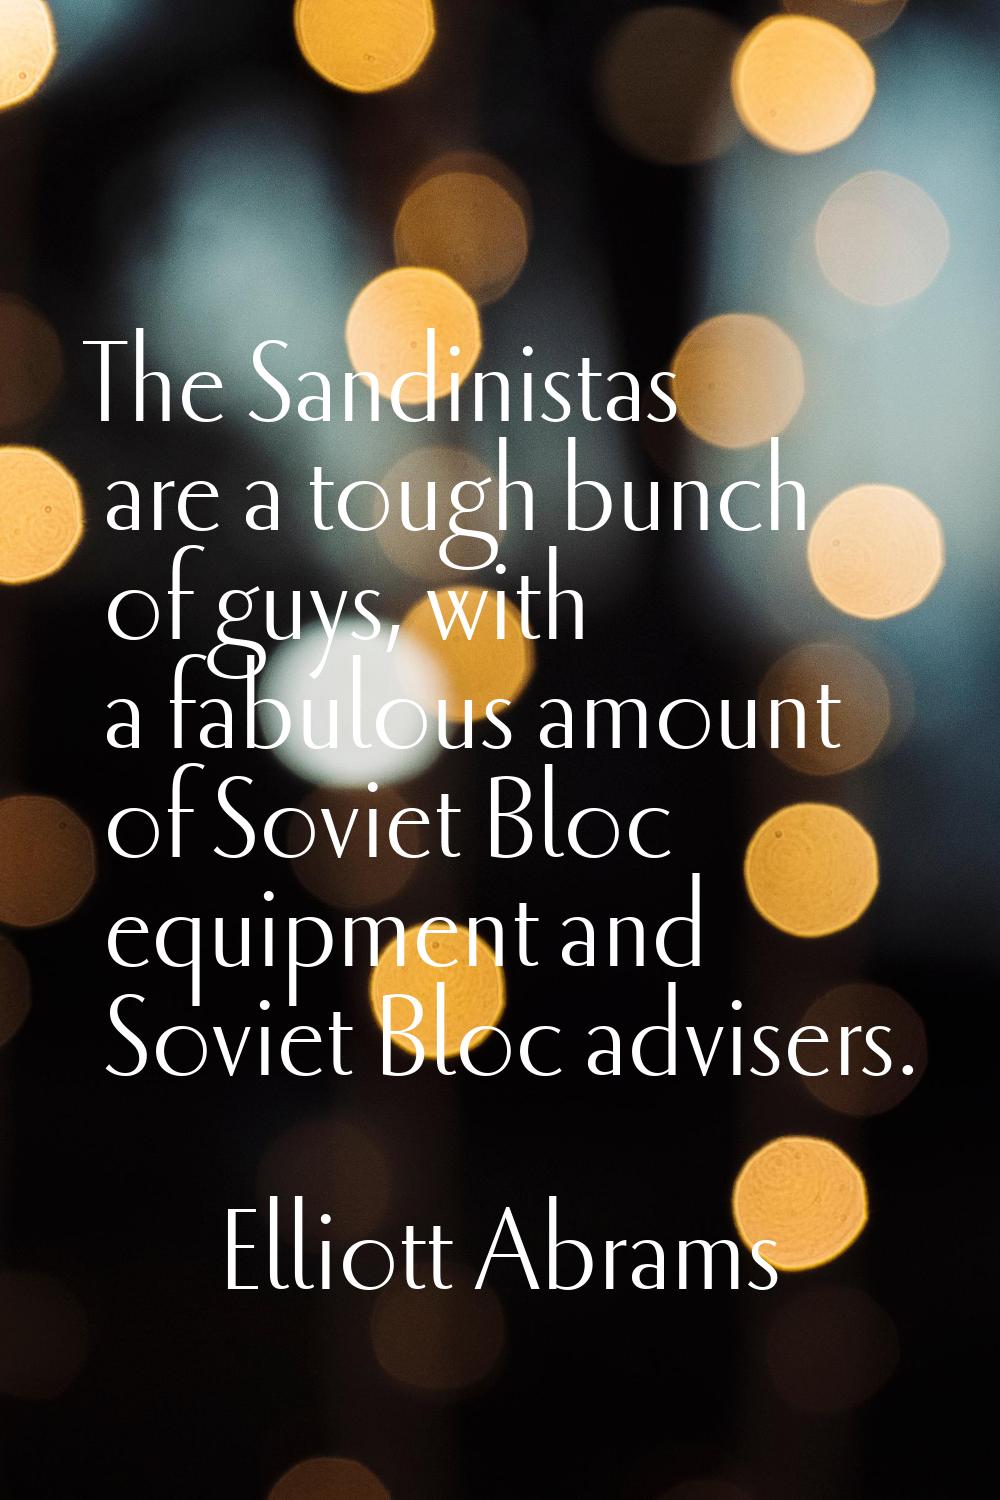 The Sandinistas are a tough bunch of guys, with a fabulous amount of Soviet Bloc equipment and Sovi